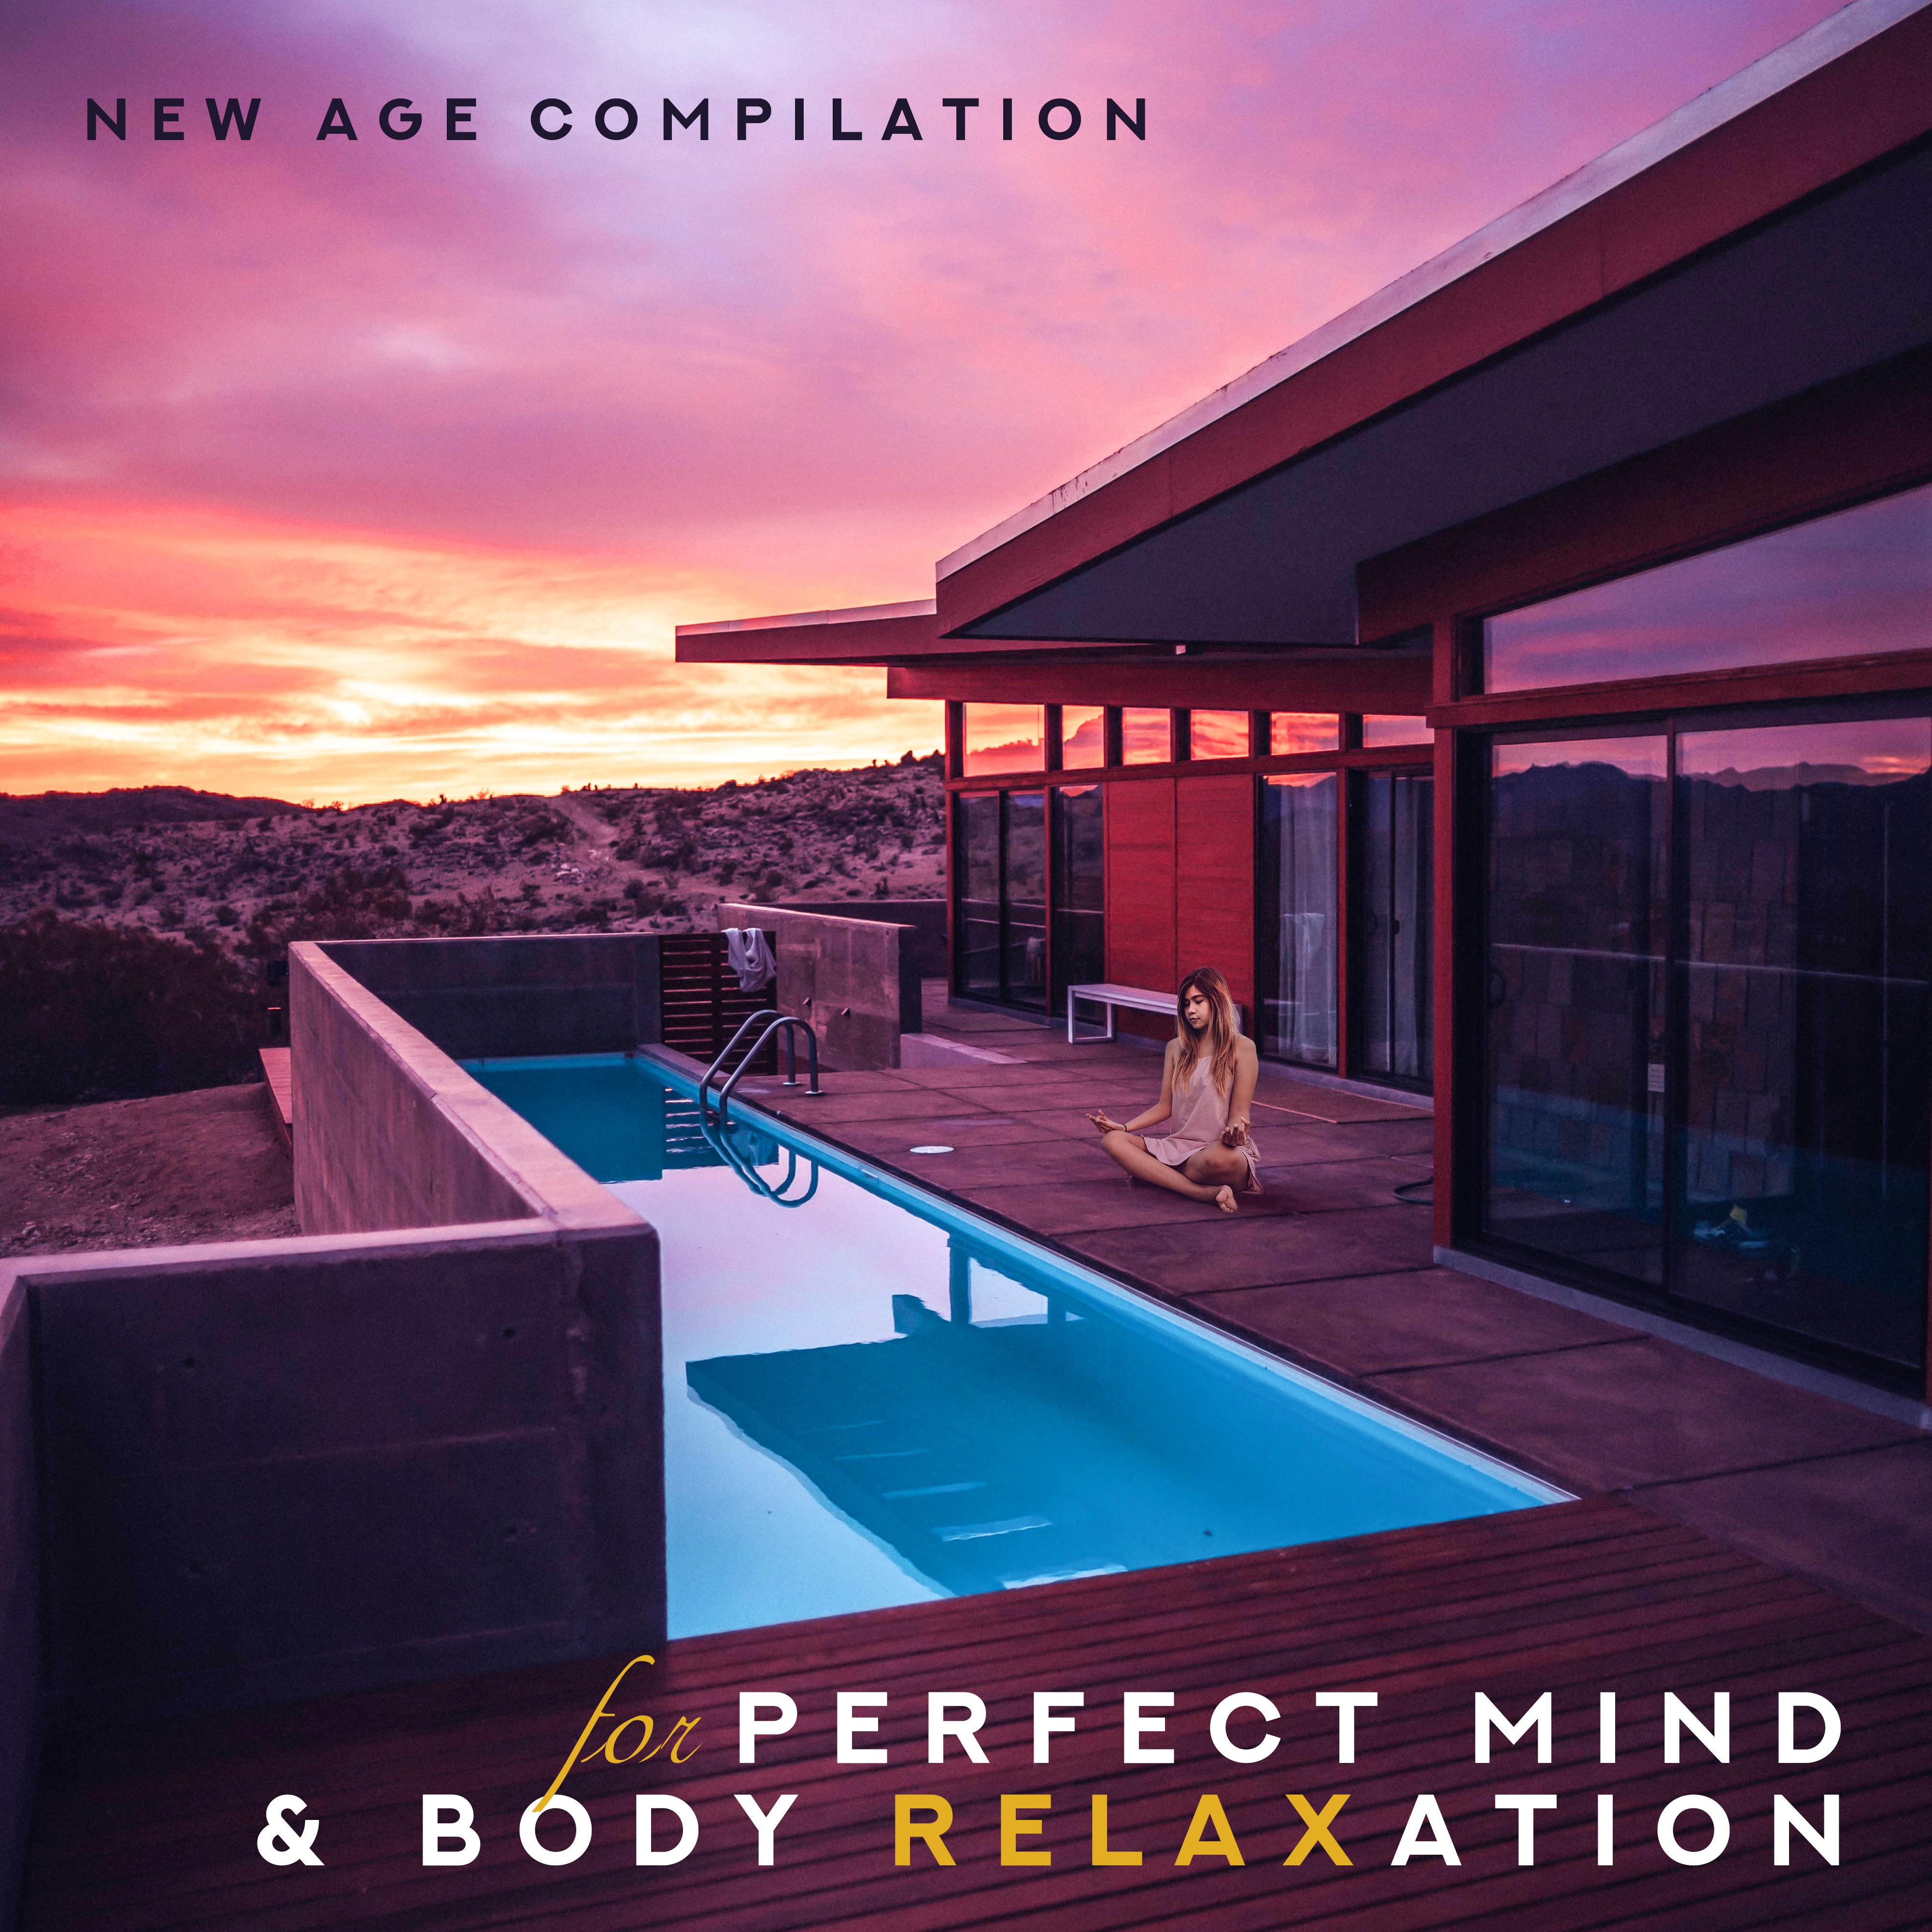 New Age Compilation for Perfect Mind & Body Relaxation